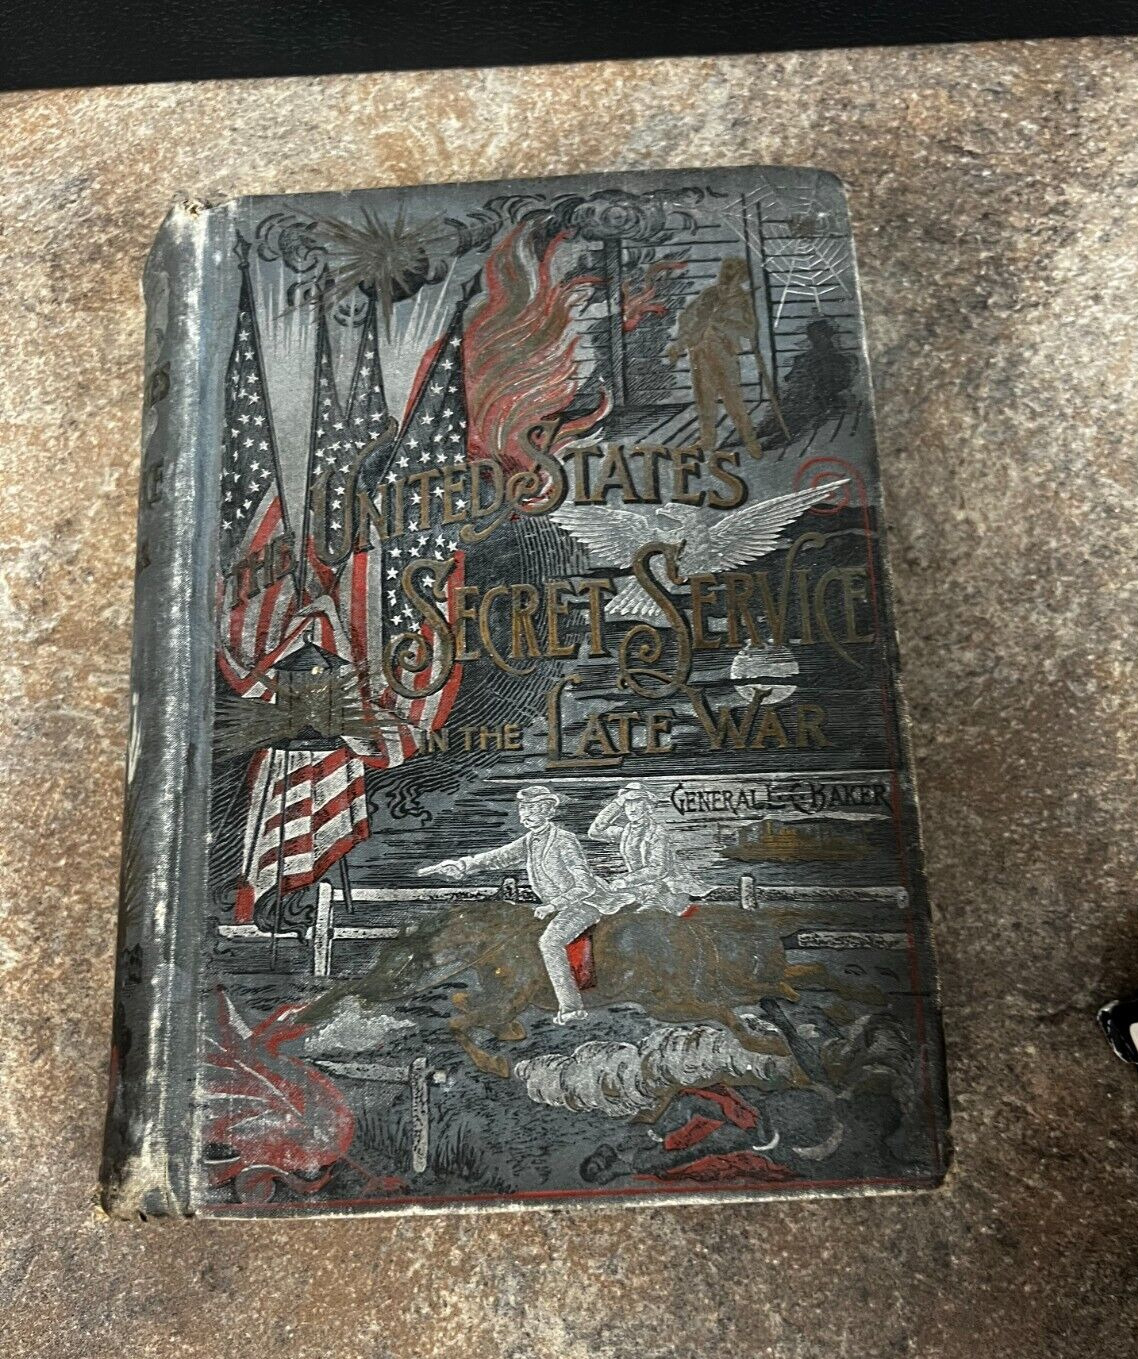 The United States Secret Service in the Late War Book by General Baker